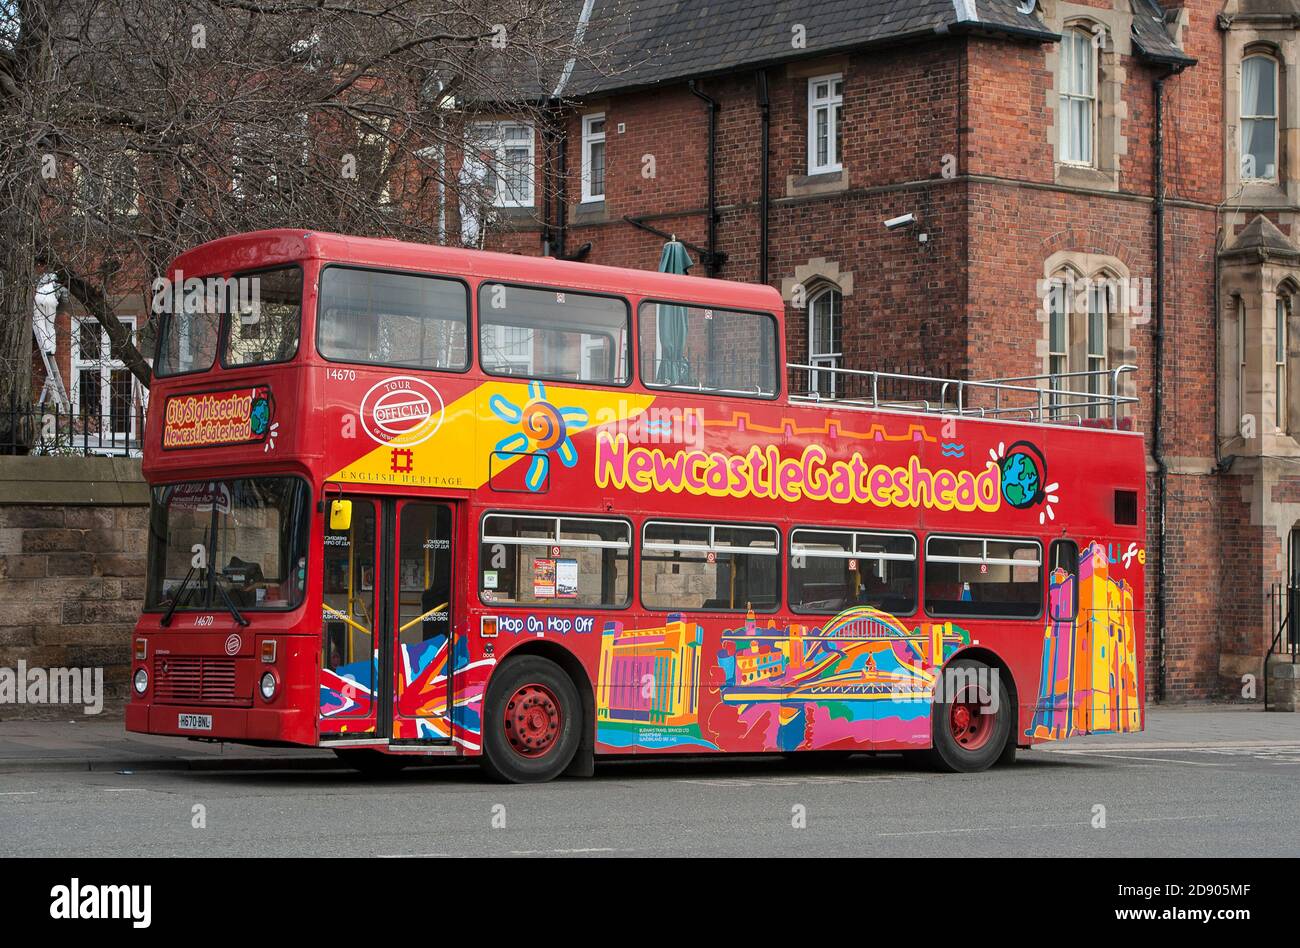 Offener Sightseeing-Bus in Newcastle upon Tyne, Tyne and Wear, Nordostengland. Stockfoto